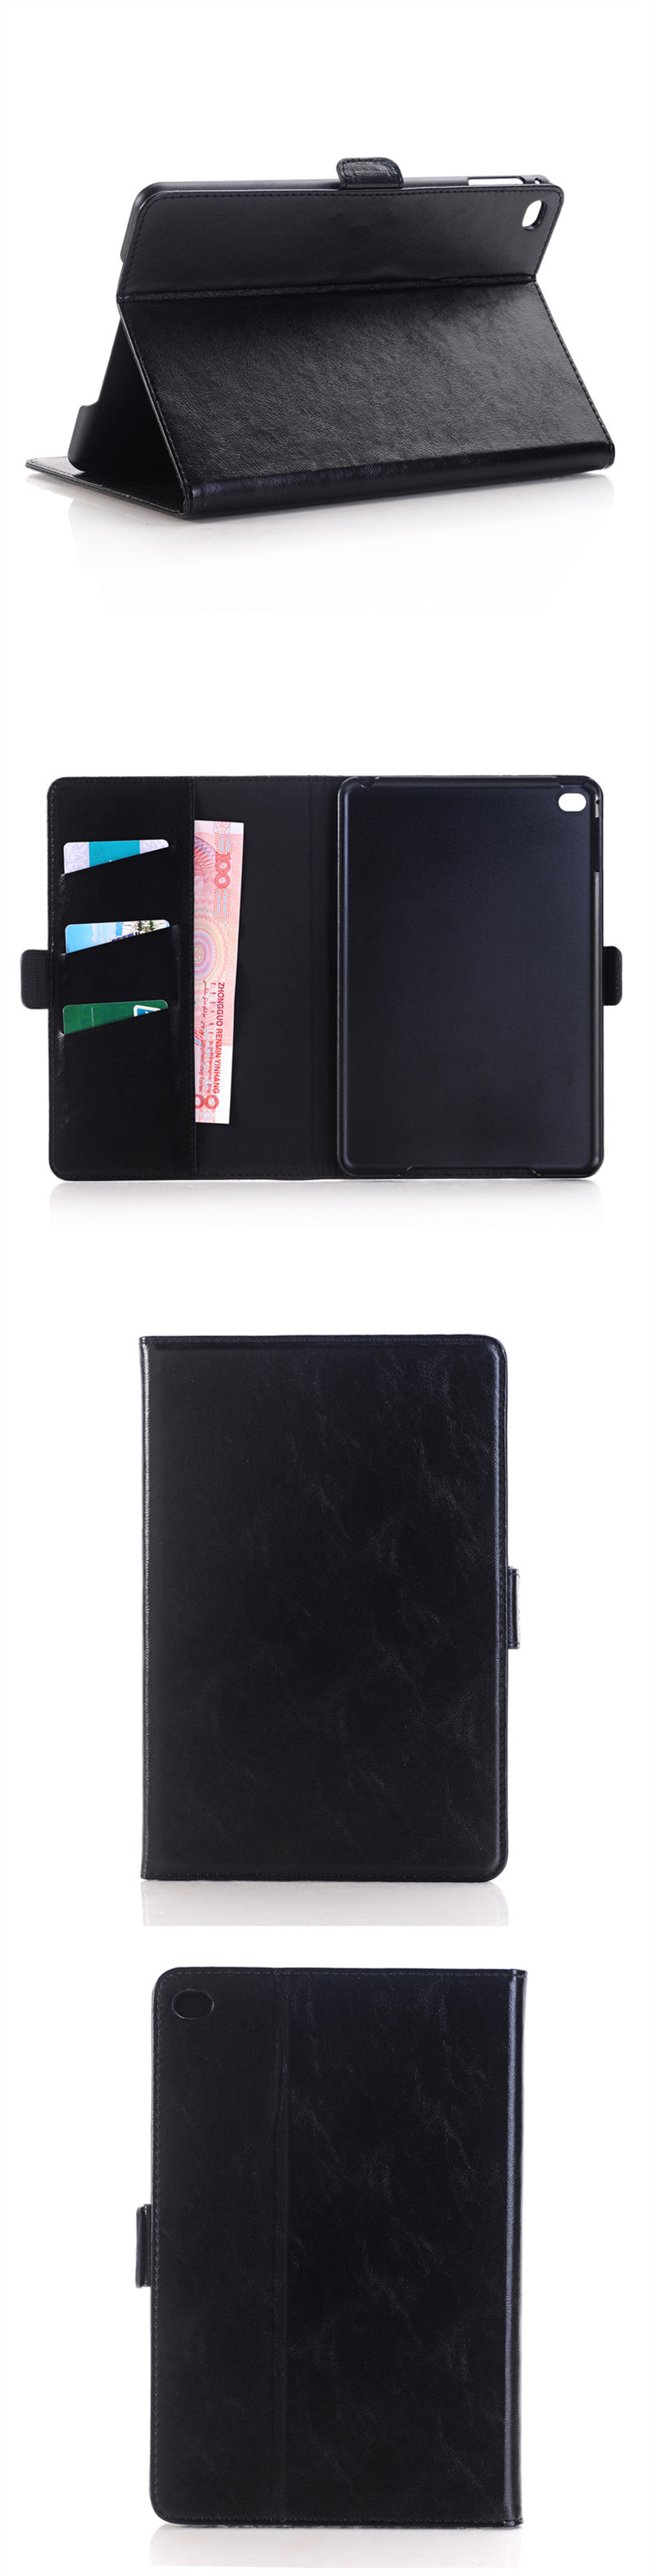 WLD-A005-Belt-Buckle-Shell-Flip-PU-Leather--Protective-Cases-For-iPad-Mini-4-1013508-3